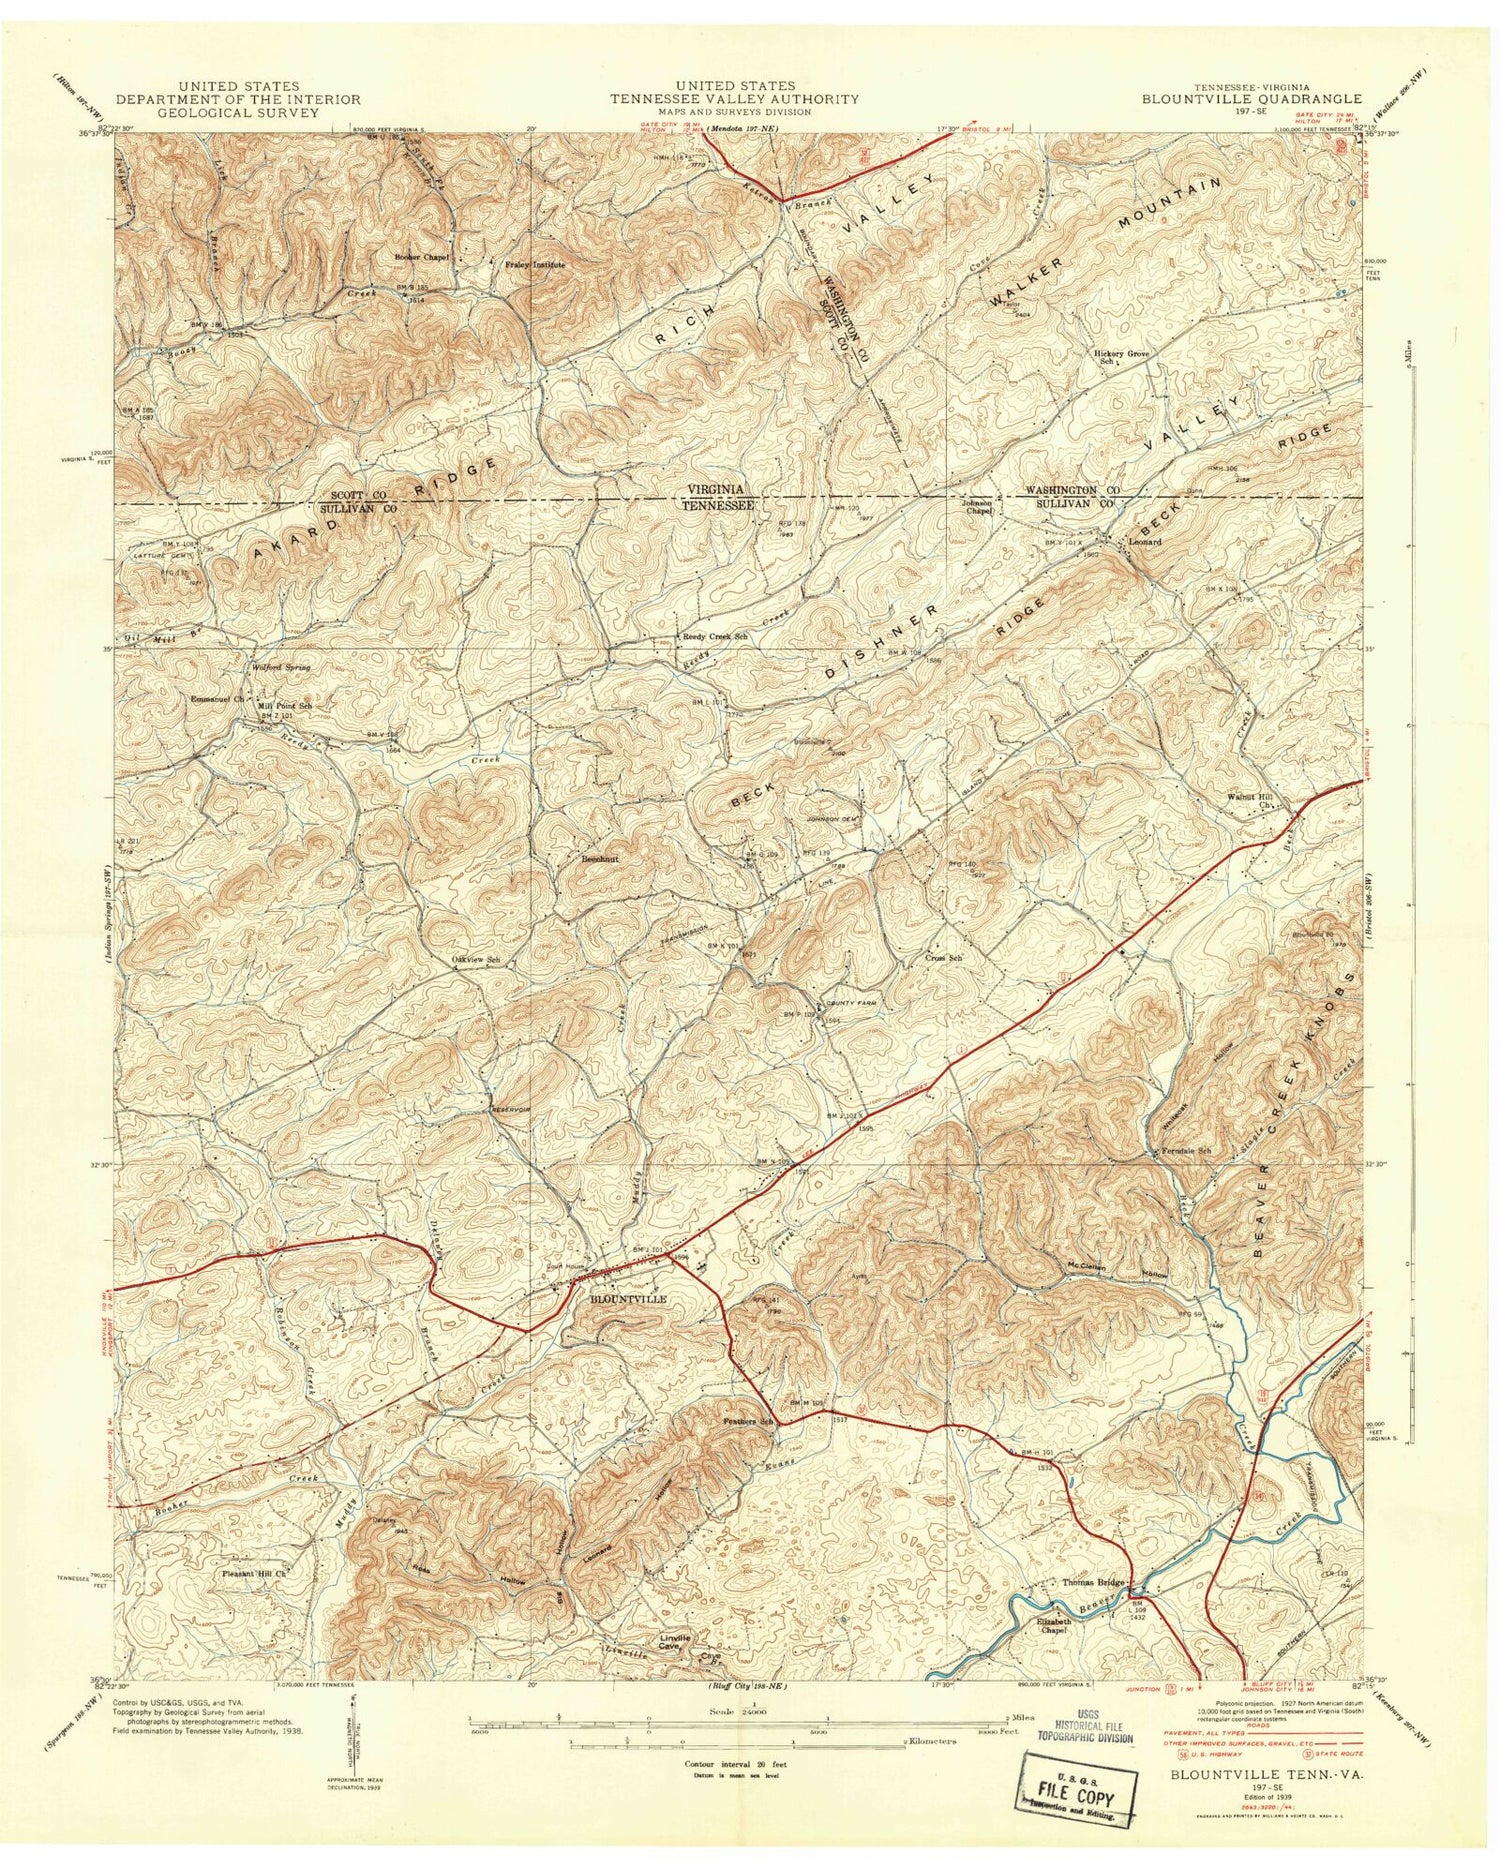 Classic USGS Blountville Tennessee 7.5'x7.5' Topo Map Image